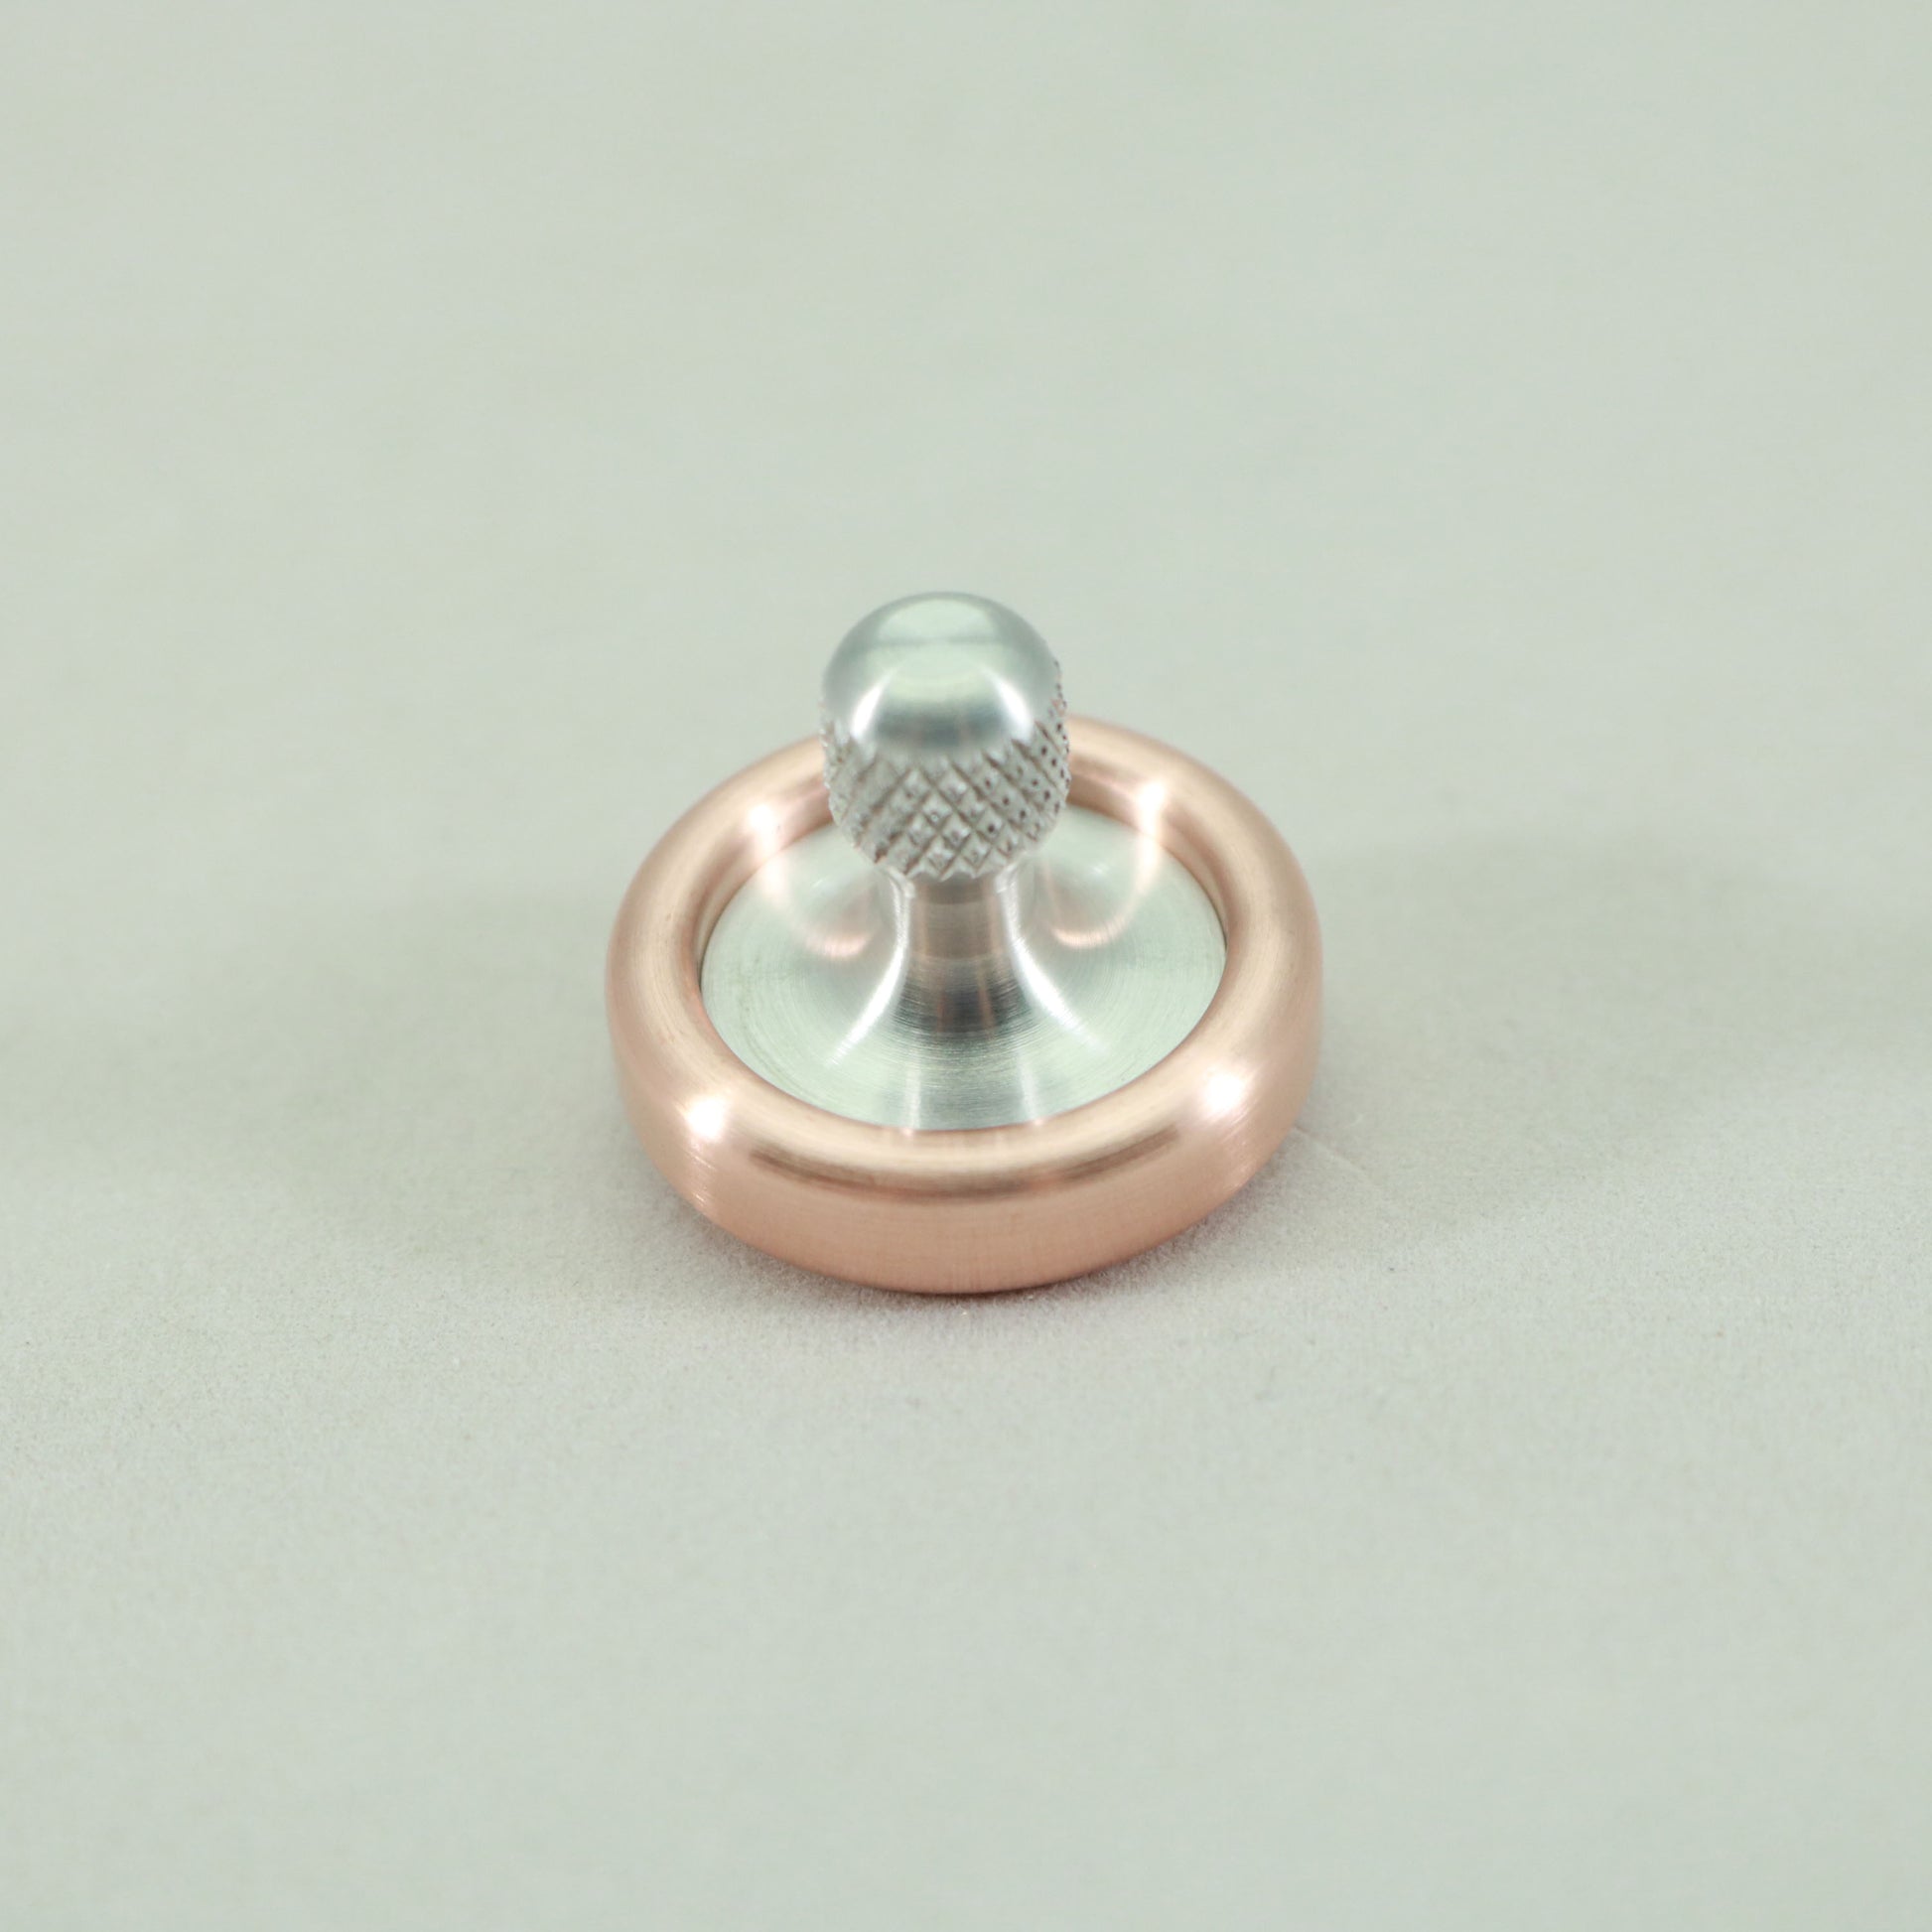 Top view of the Copper and Aluminum Dynamini spinning top by Kemner Design